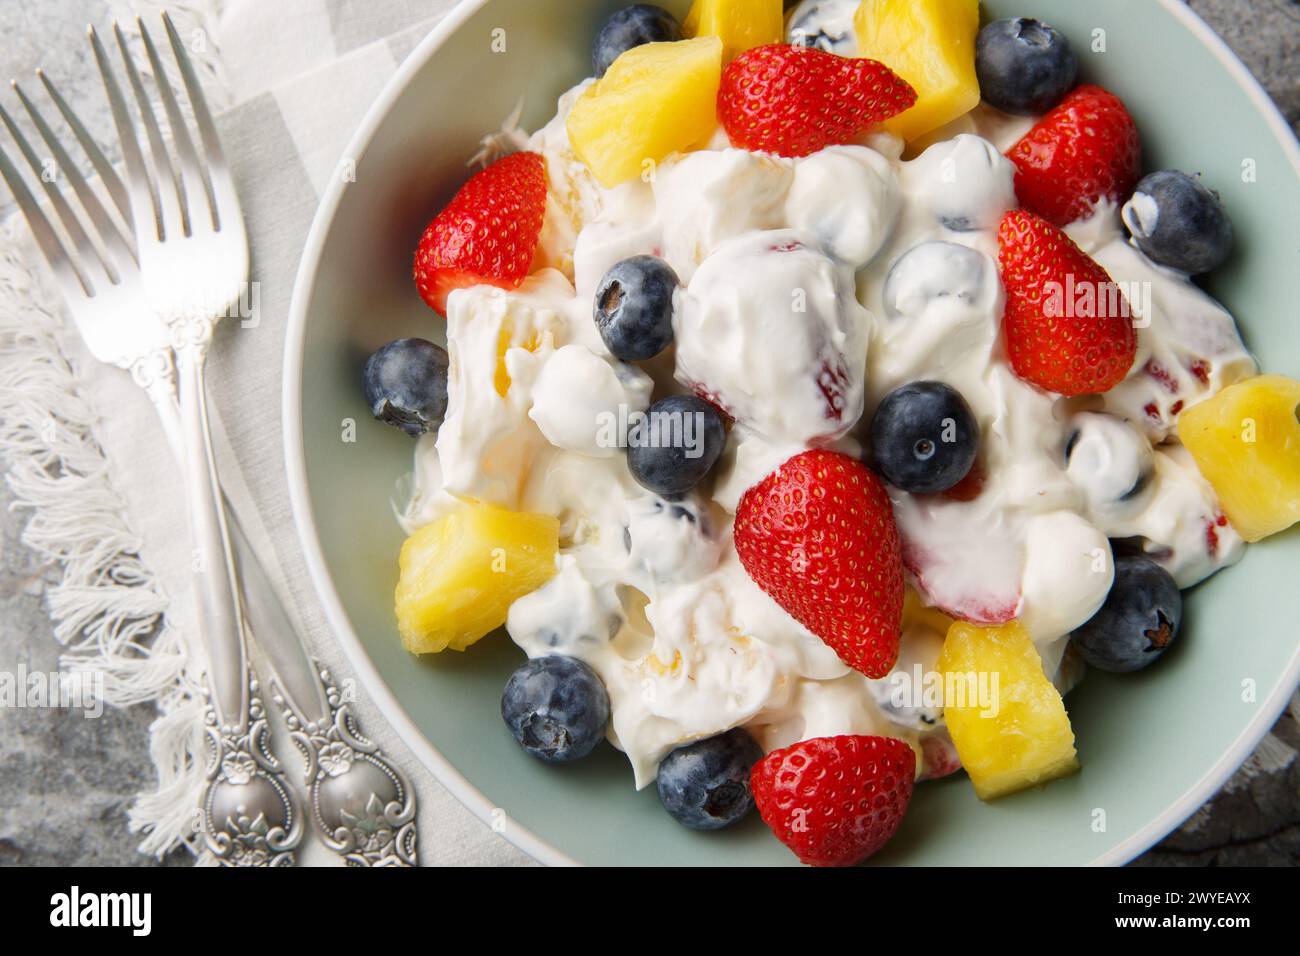 Summer cheesecake salad with strawberries, blueberries, pineapple, dressed with cream cheese and cream close-up in a bowl on a marble table. Horizonta Stock Photo